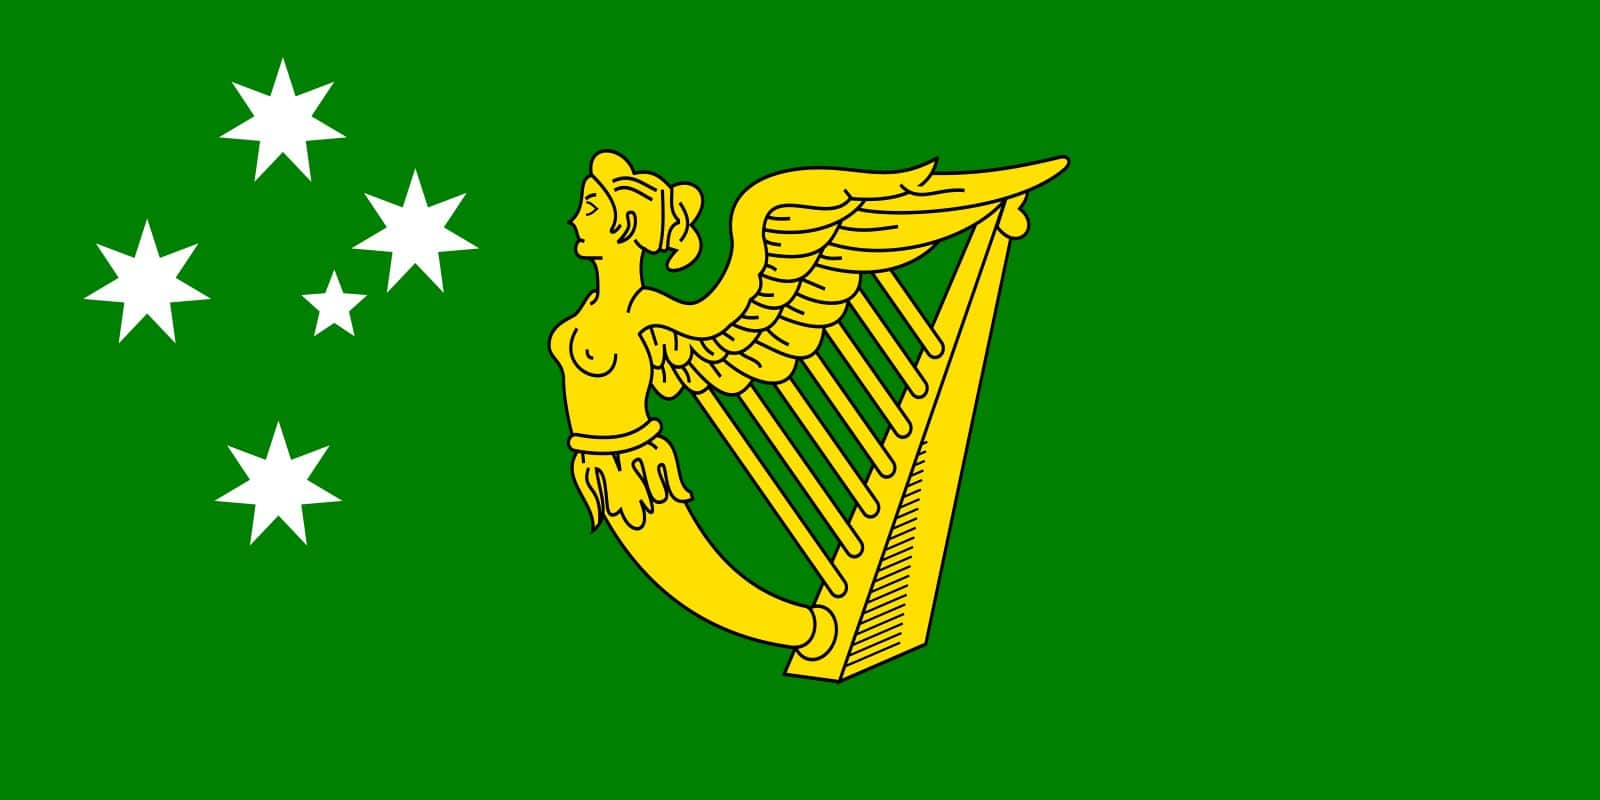 Image Credit: Shutterstock / Maxim Studio <p>An Irish republican organization founded in the U.S. in 1858, the Fenians aimed to establish an independent Ireland. They were known for staging raids into Canada during the late 1860s.</p>